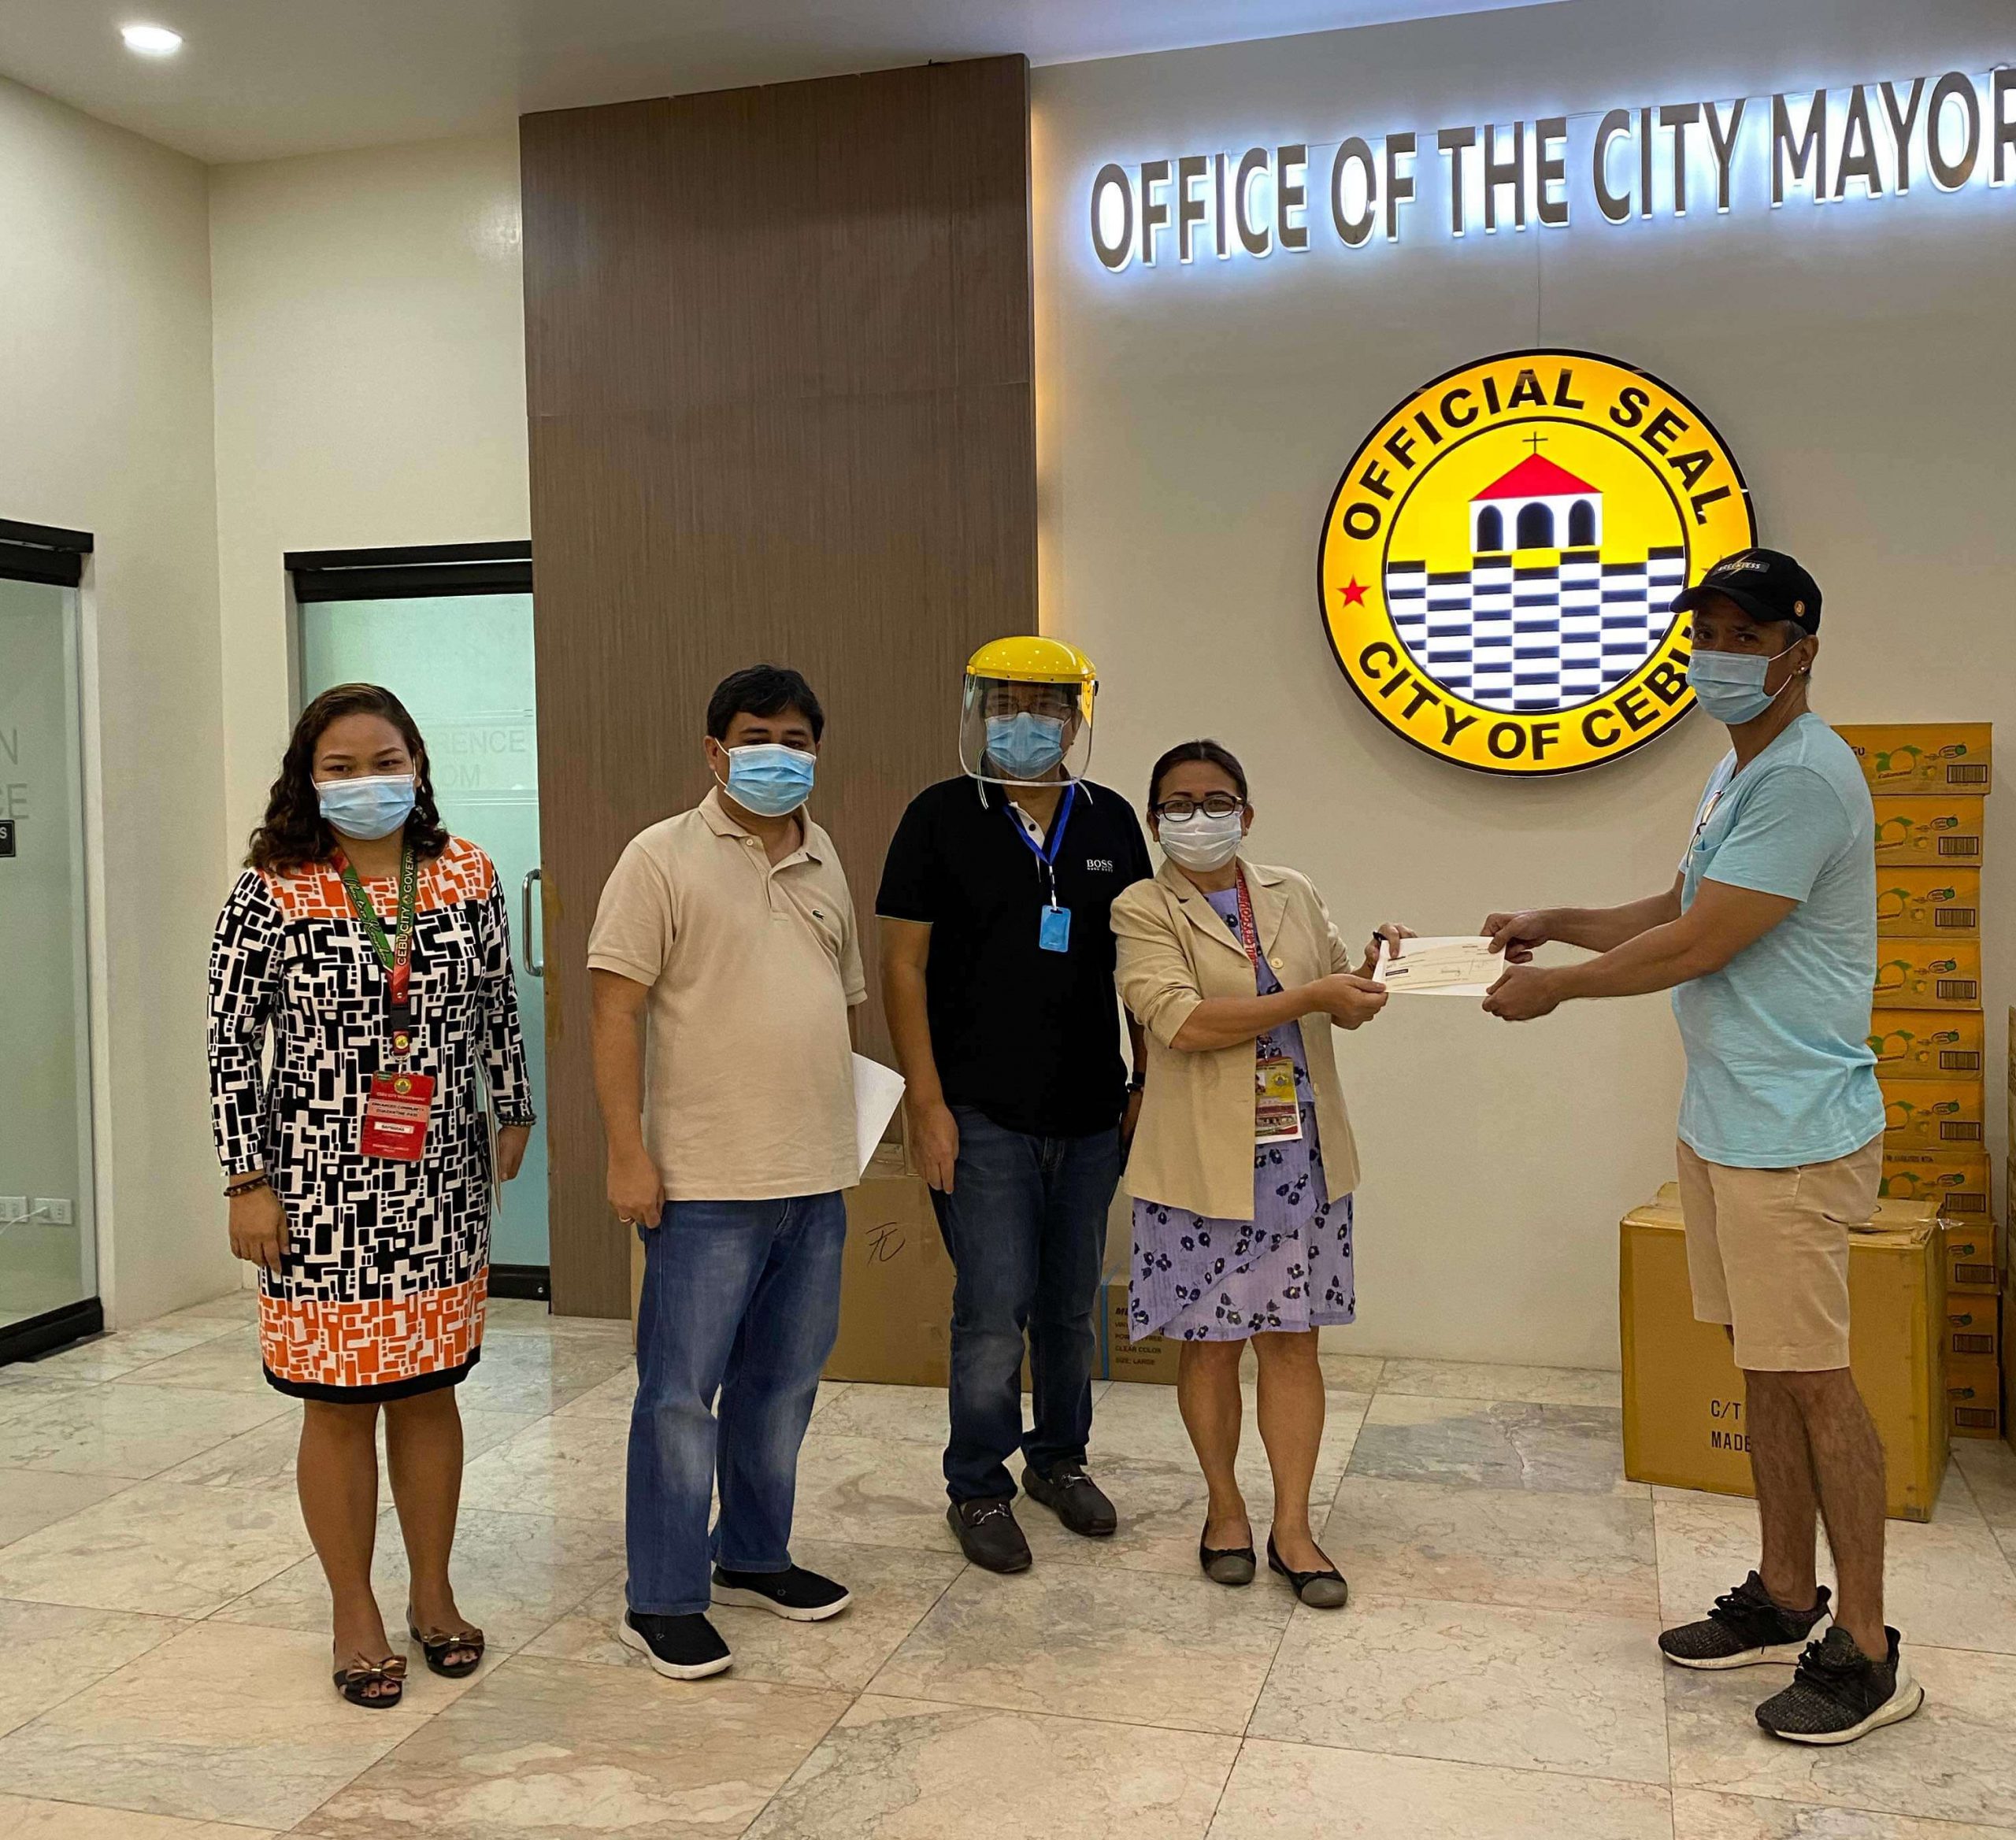 CEBU CITY officials led by Mayor Edgardo Labella (3rd from left) accept businessman Michael Gleissner’s P2 million donation from his representative in Cebu, Joe Mercado. The amount will be used in the city’s Covid-19 response, particularly in helping ease the burden on residents affected by strict quarantine measures. Also in the photo are (from left) Atty. Mary Rose S. Lubino, Labella’s chief of staff; Atty. Jerome Castillo of the City Treasurer’s Office and City Treasurer Juanita Monina Paires.